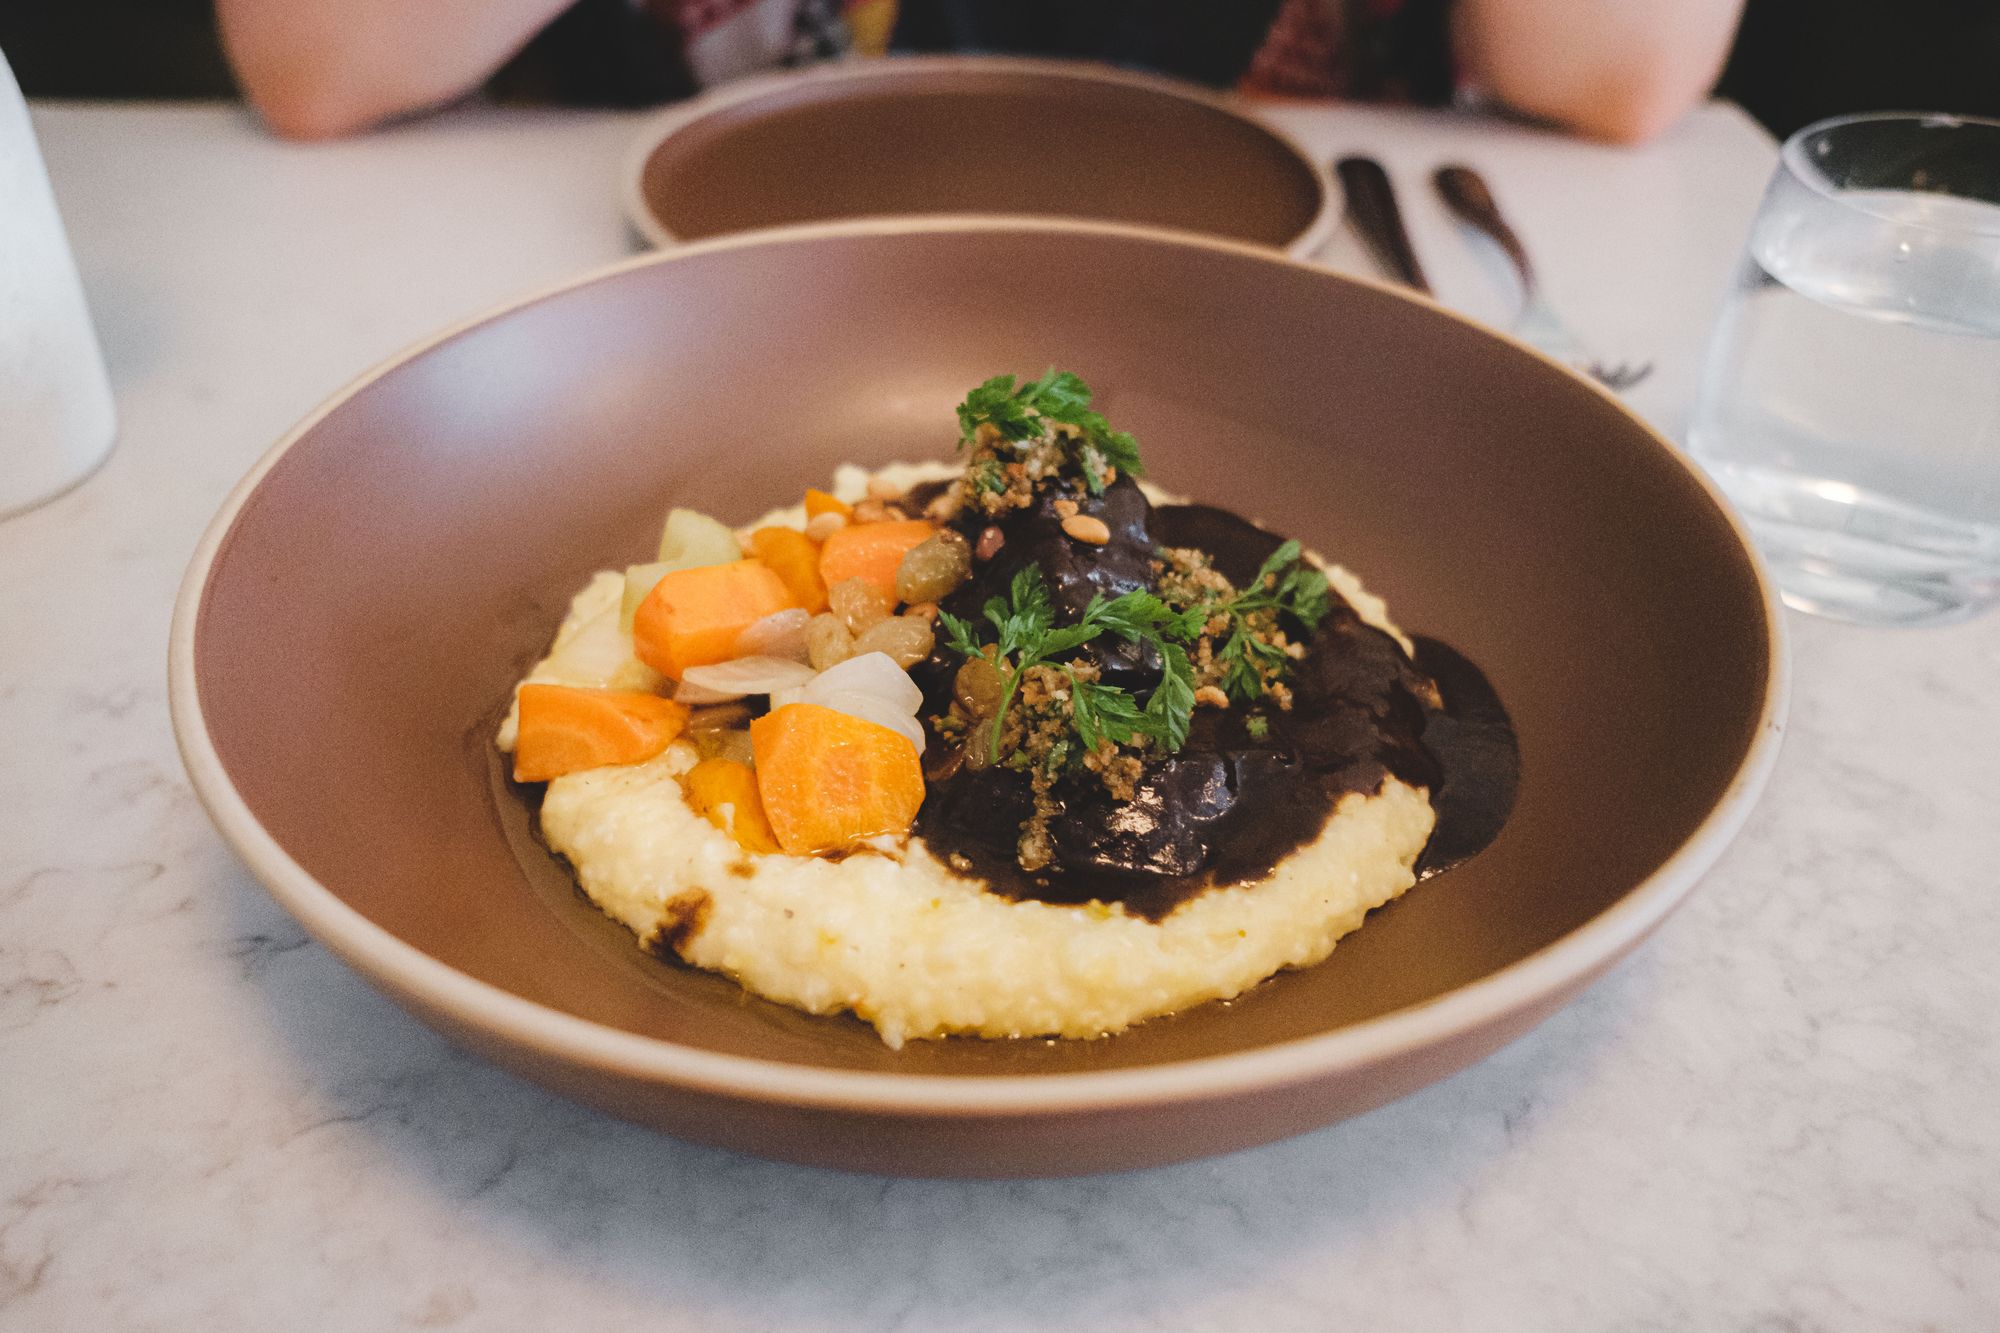 Say Mercy! in Vancouver – Beef Cheek and Grits